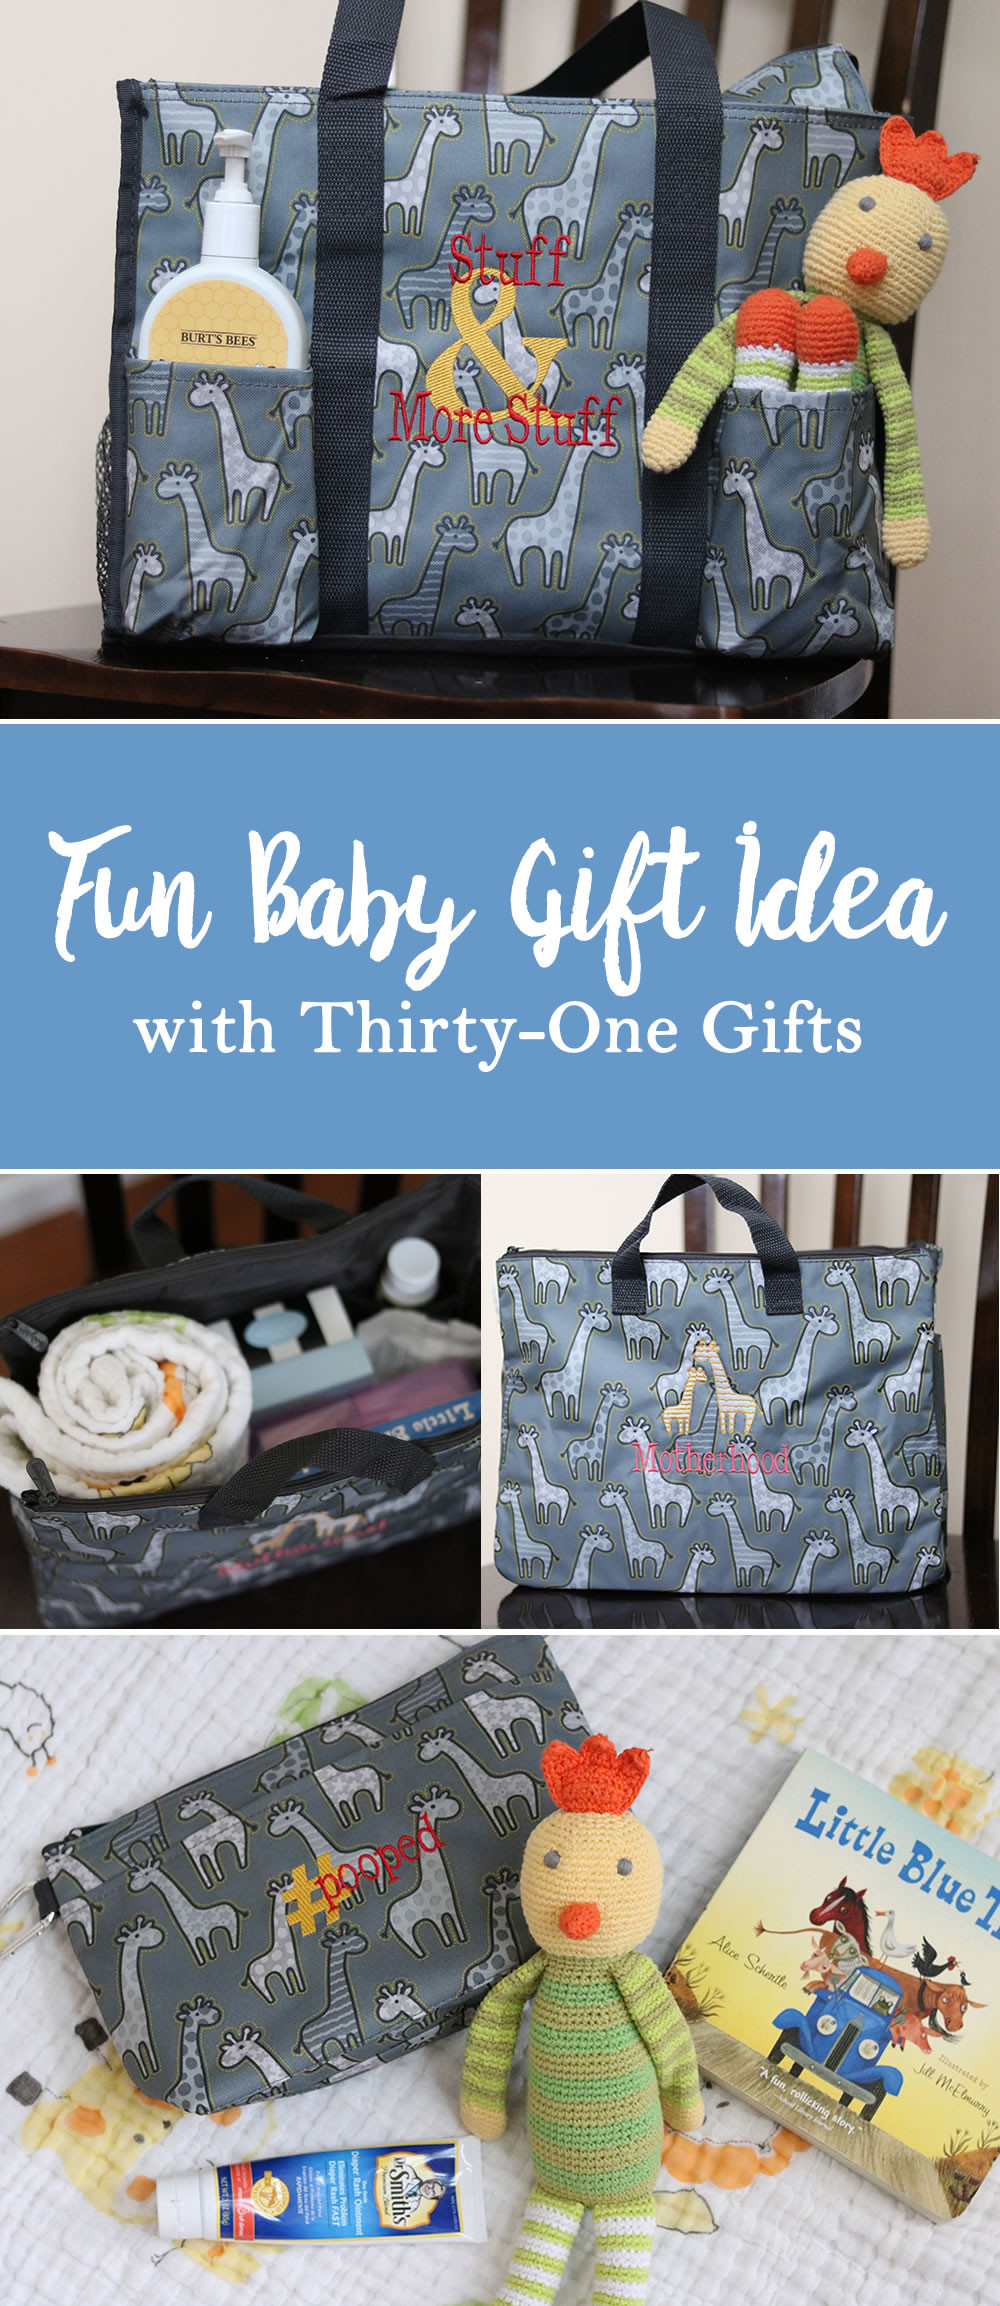 Gift Ideas For Someone Who Just Had A Baby
 Fun Baby Gift Idea Thirty e Gifts Giveaway Spit Up